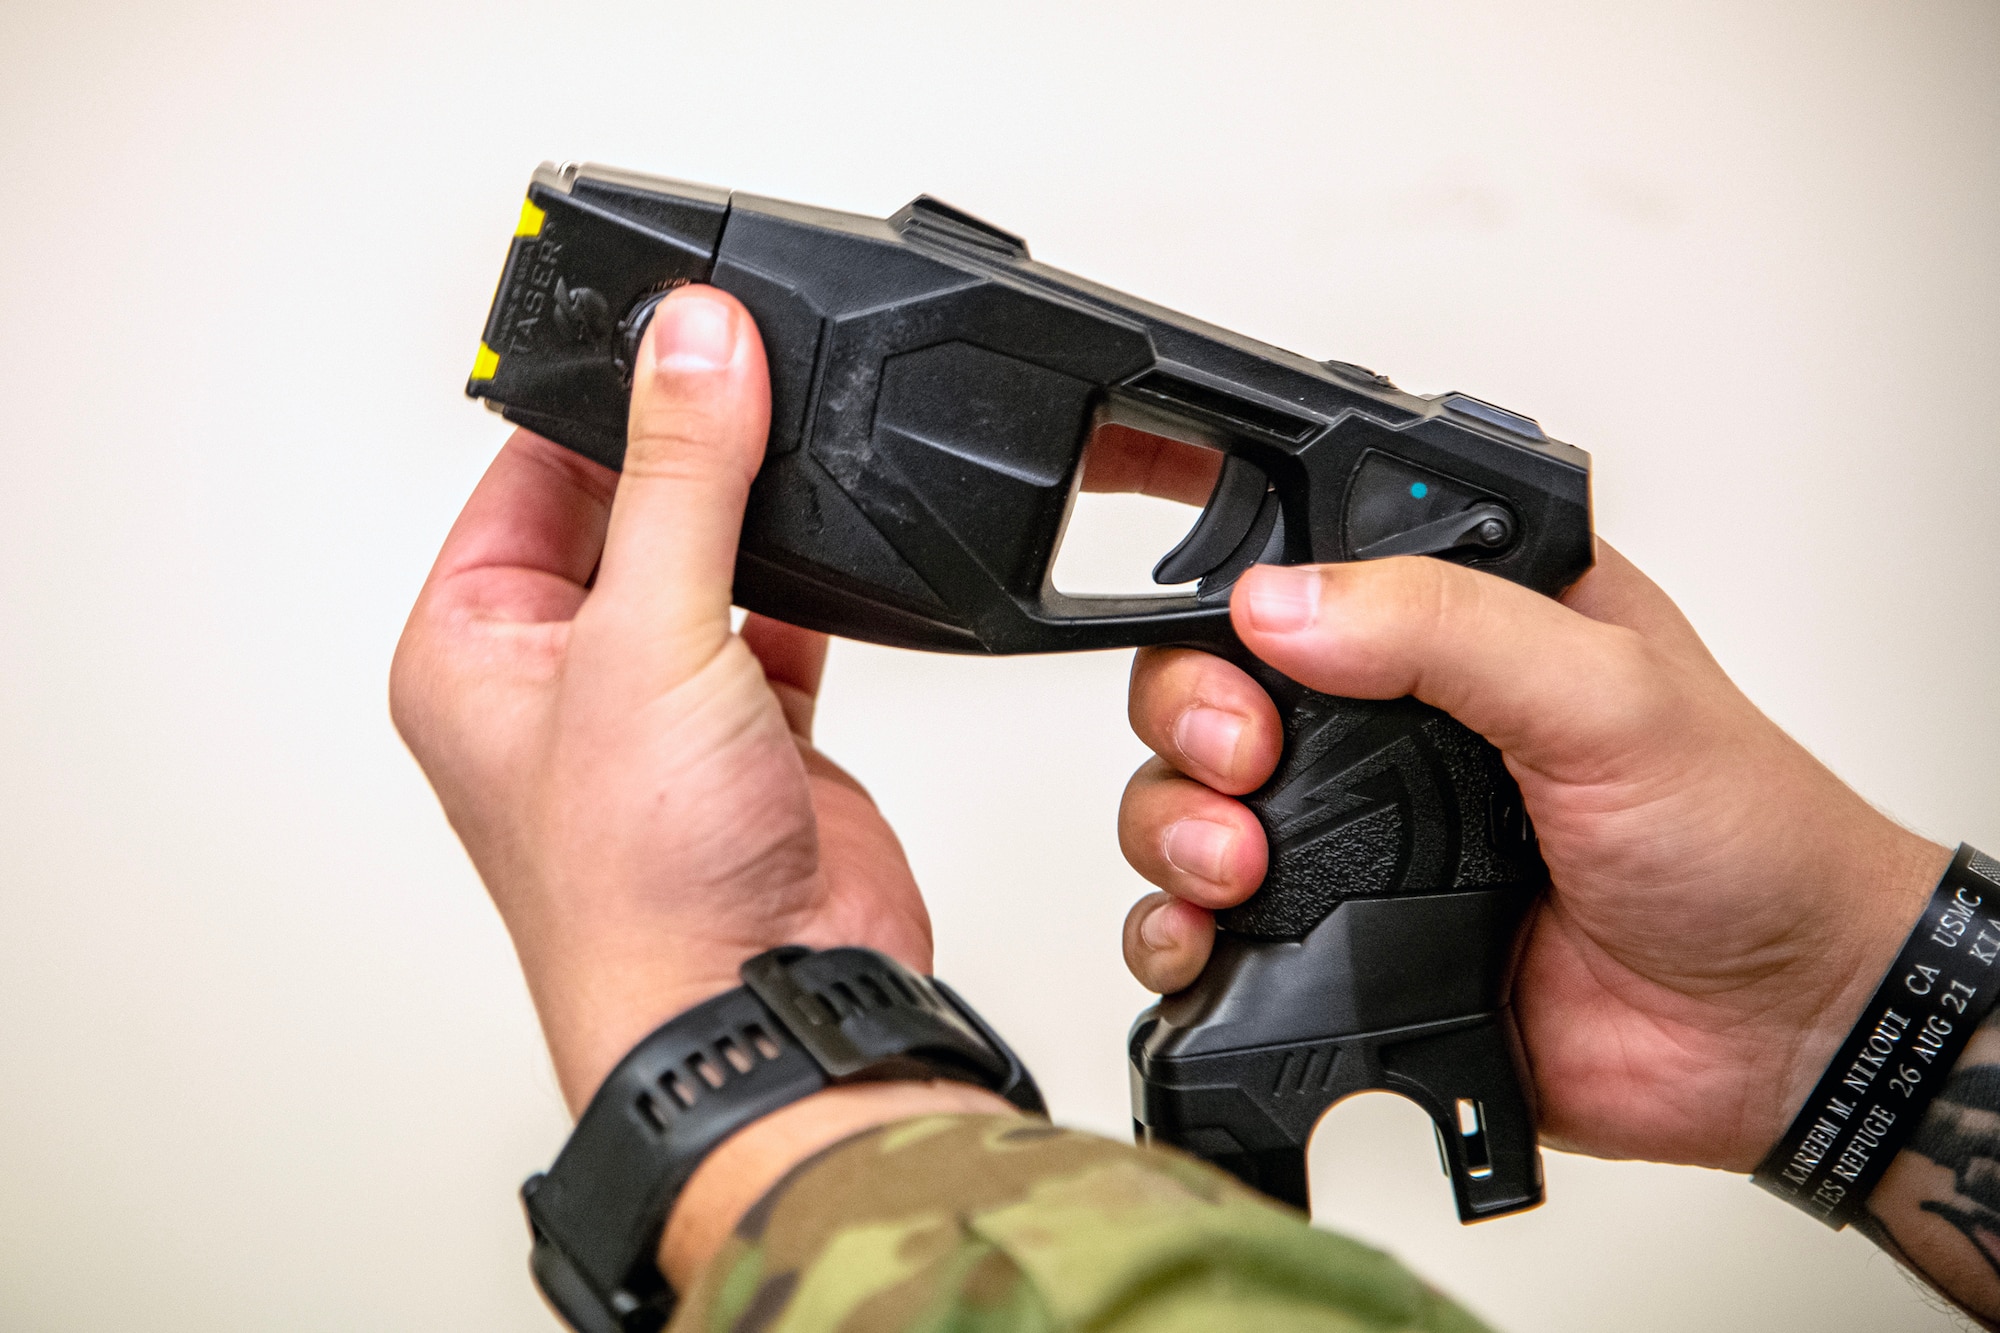 An Airman from the 423d Security Forces Squadron arms a Taser during a non-lethal combatives qualification course at RAF Alconbury, England, Feb. 7, 2023. The course provided Defenders with the skills and knowledge to properly detain a suspect using non-lethal combative methods. (U.S. Air Force photo by Staff Sgt. Eugene Oliver)